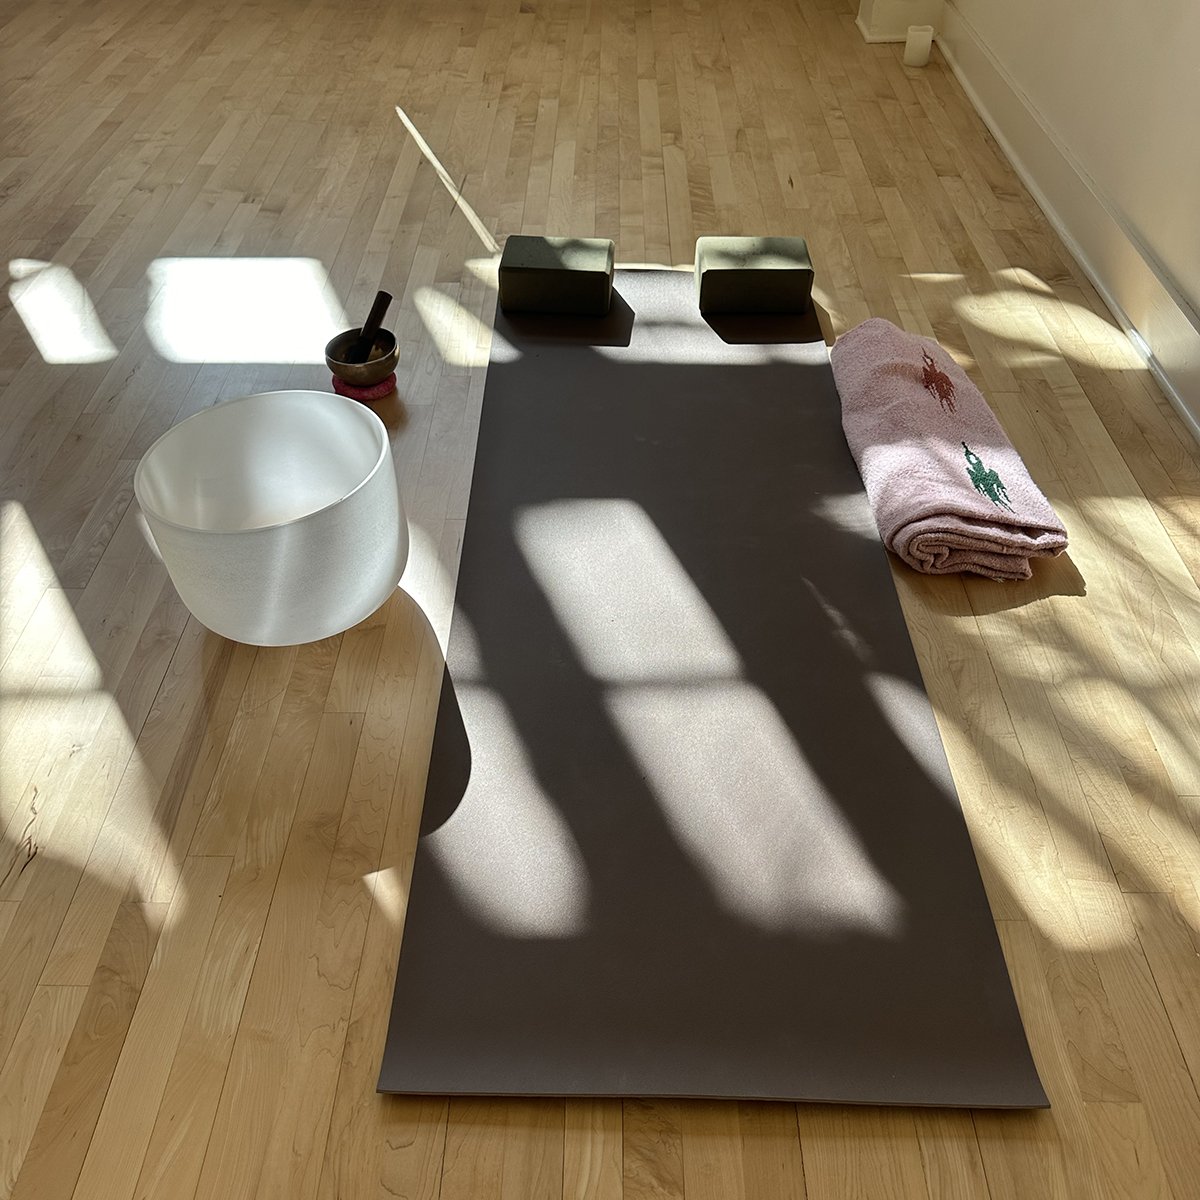 Prana Yoga and Healing Center: Read Reviews and Book Classes on ClassPass